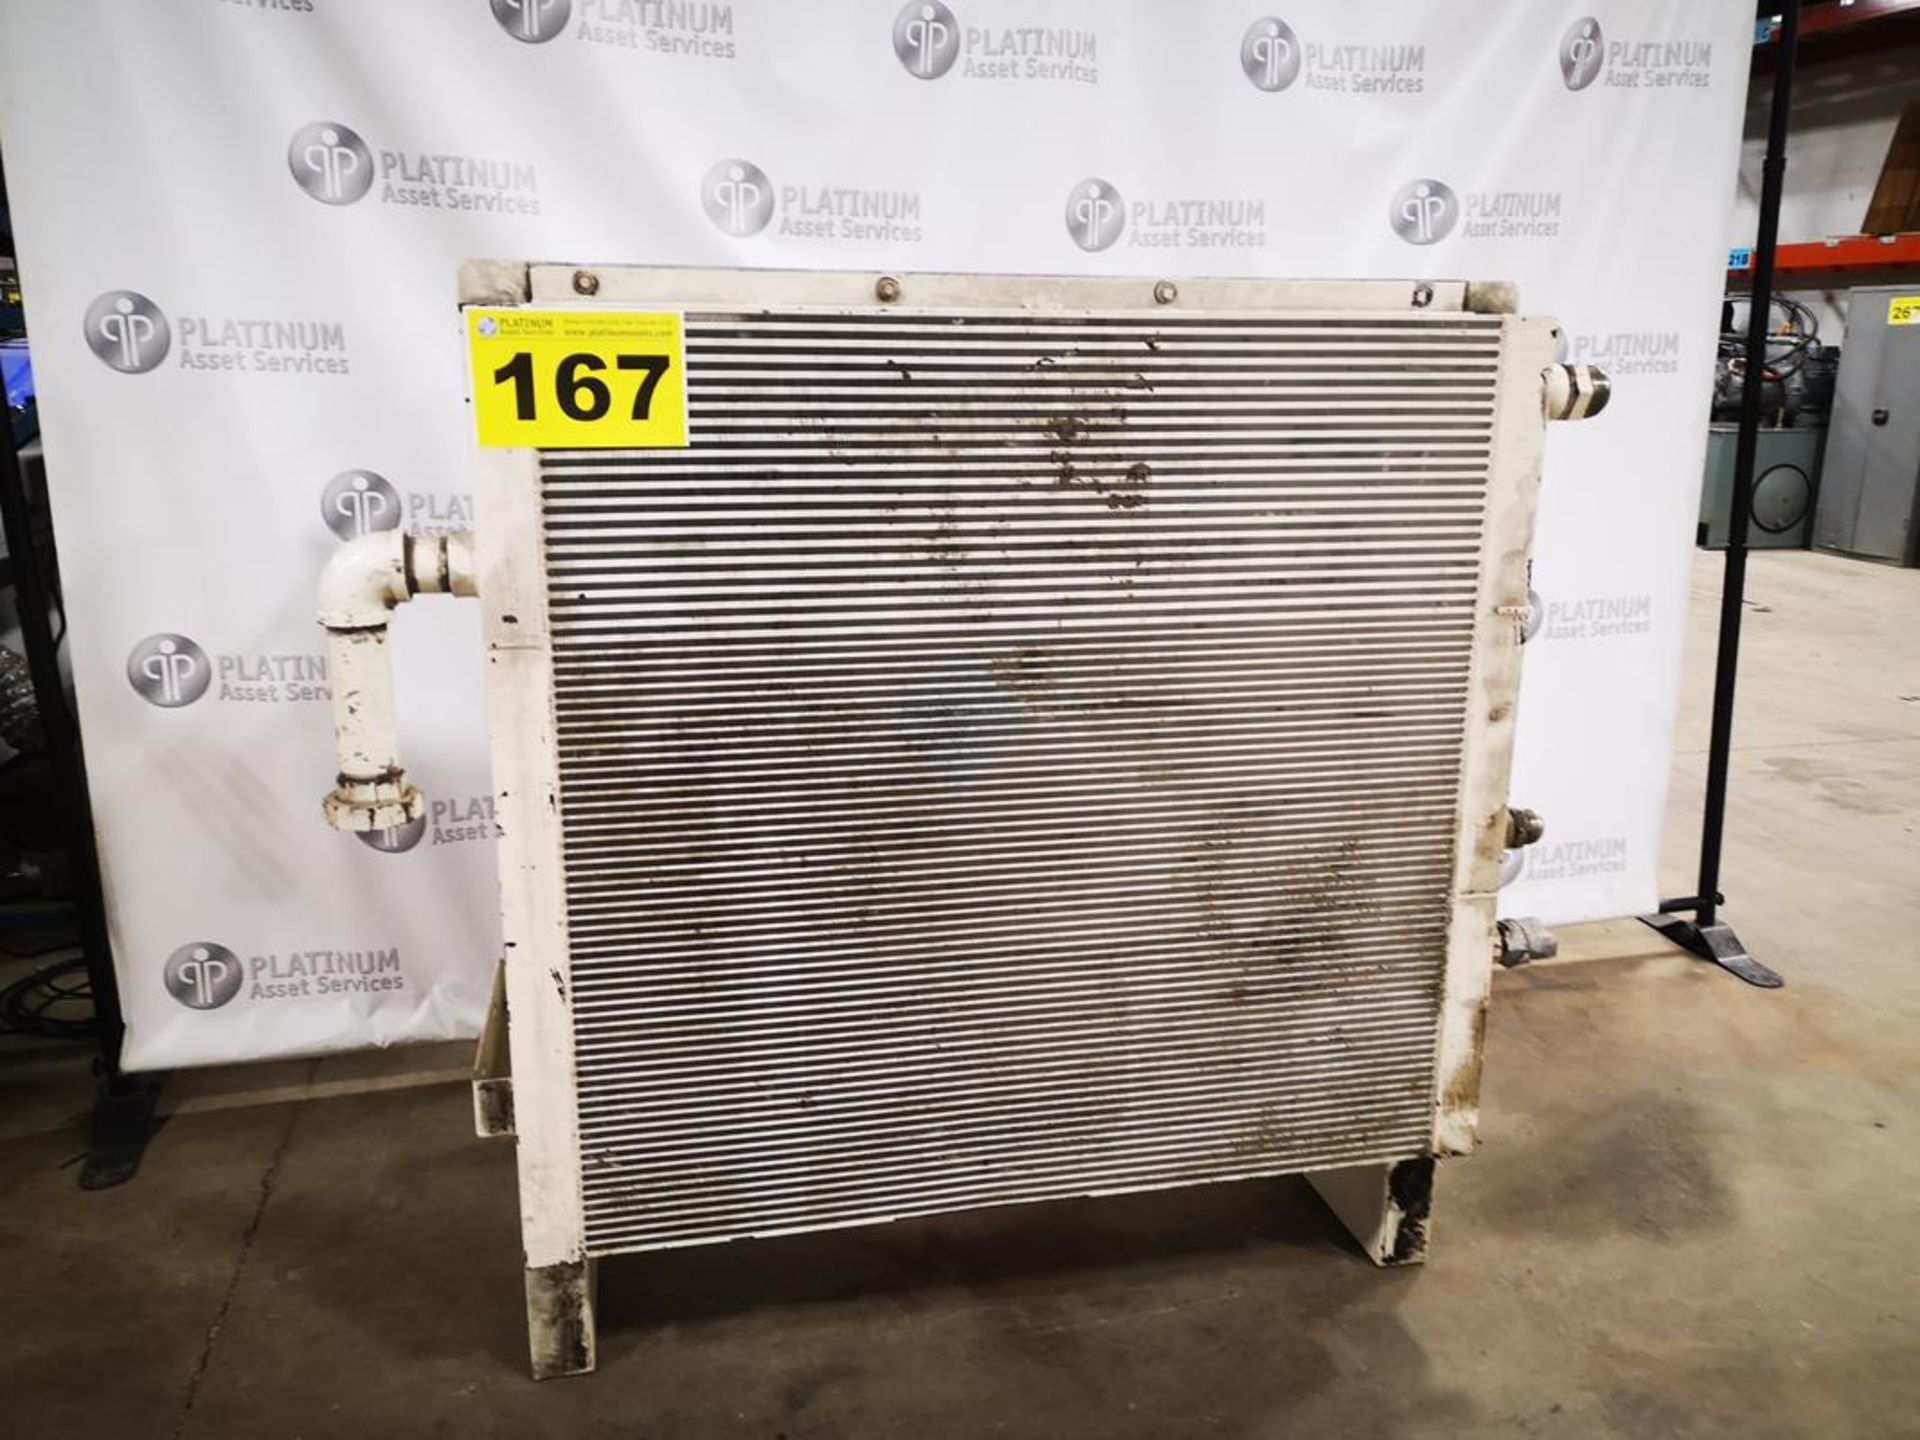 HEAT EXCHANGER, ALUMINUM RADIATOR MOUNTED TO STEEL FRAME 48" X 44" DUAL 2" INLET / OUTLET, NO FAN OR